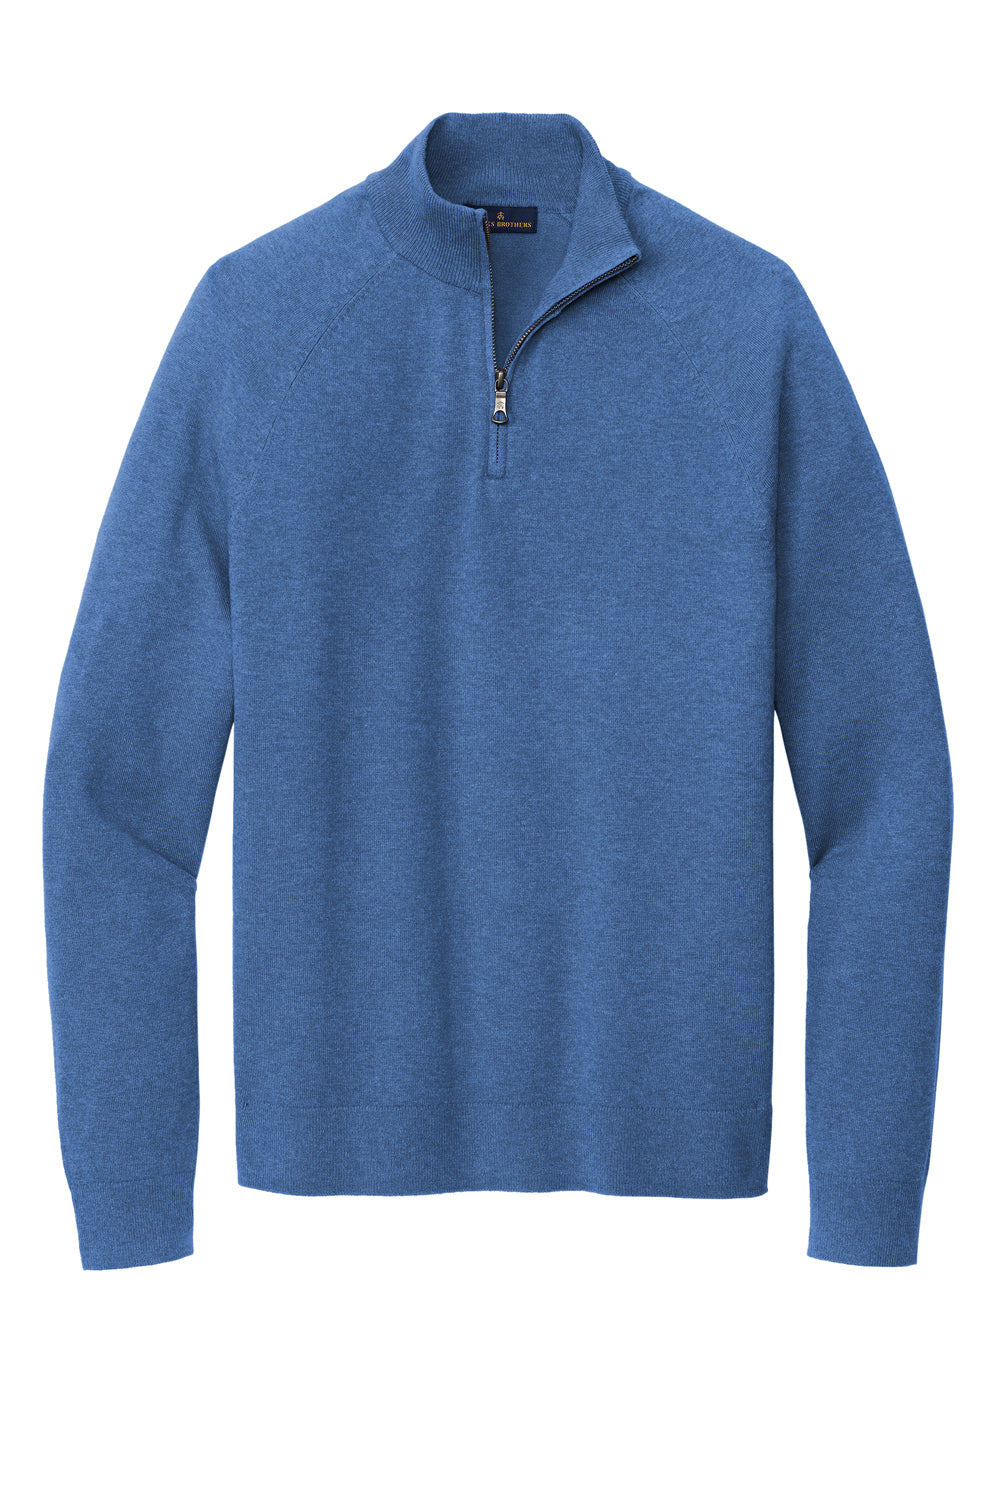 Brooks Brothers Mens Long Sleeve 1/4 Zip Sweater Heather Charter Blue Flat Front